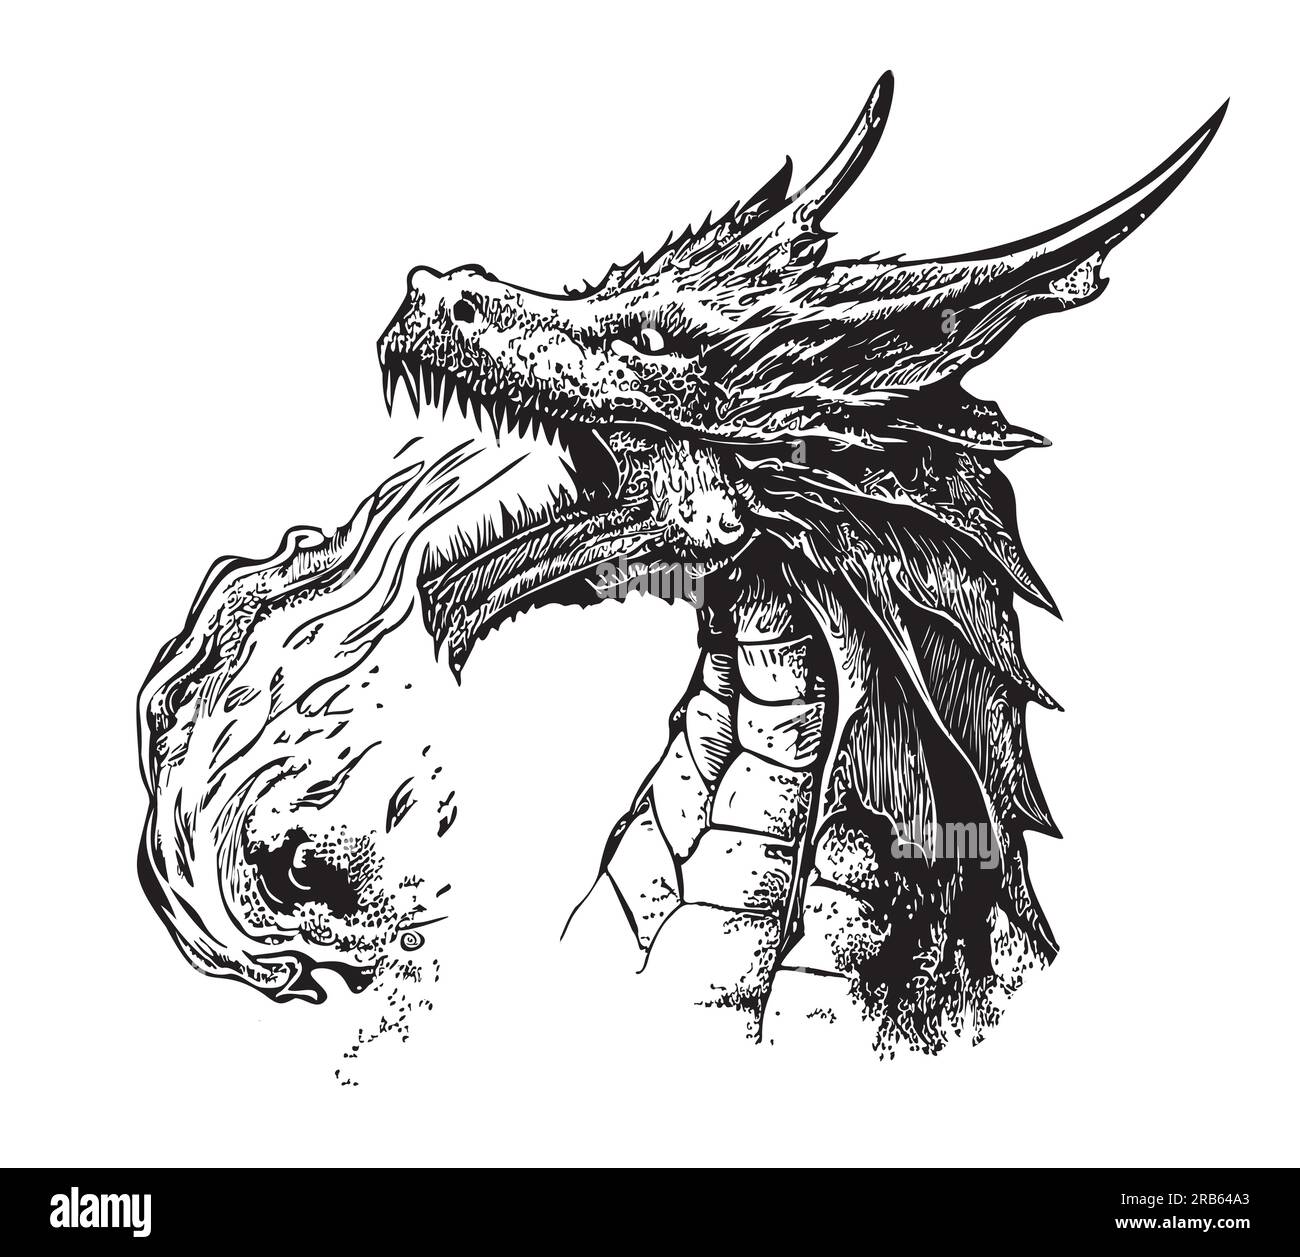 Dragon mystical breathing fire sketch drawn in doodle style illustration Stock Vector